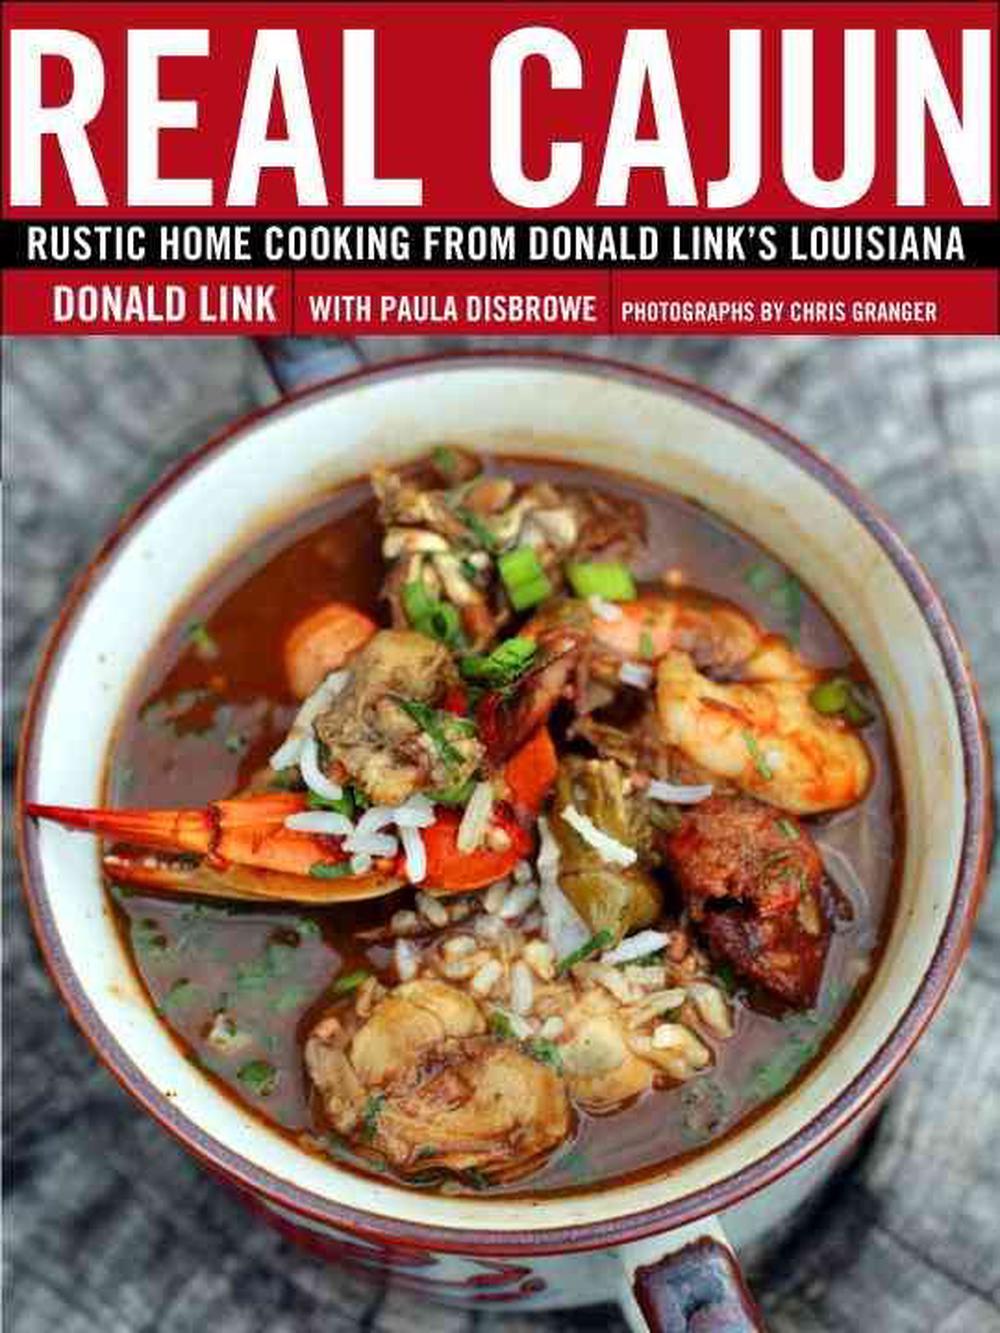 Real Cajun Rustic Home Cooking from Donald Link's Louisiana by Donald Link (Eng 9780307395818